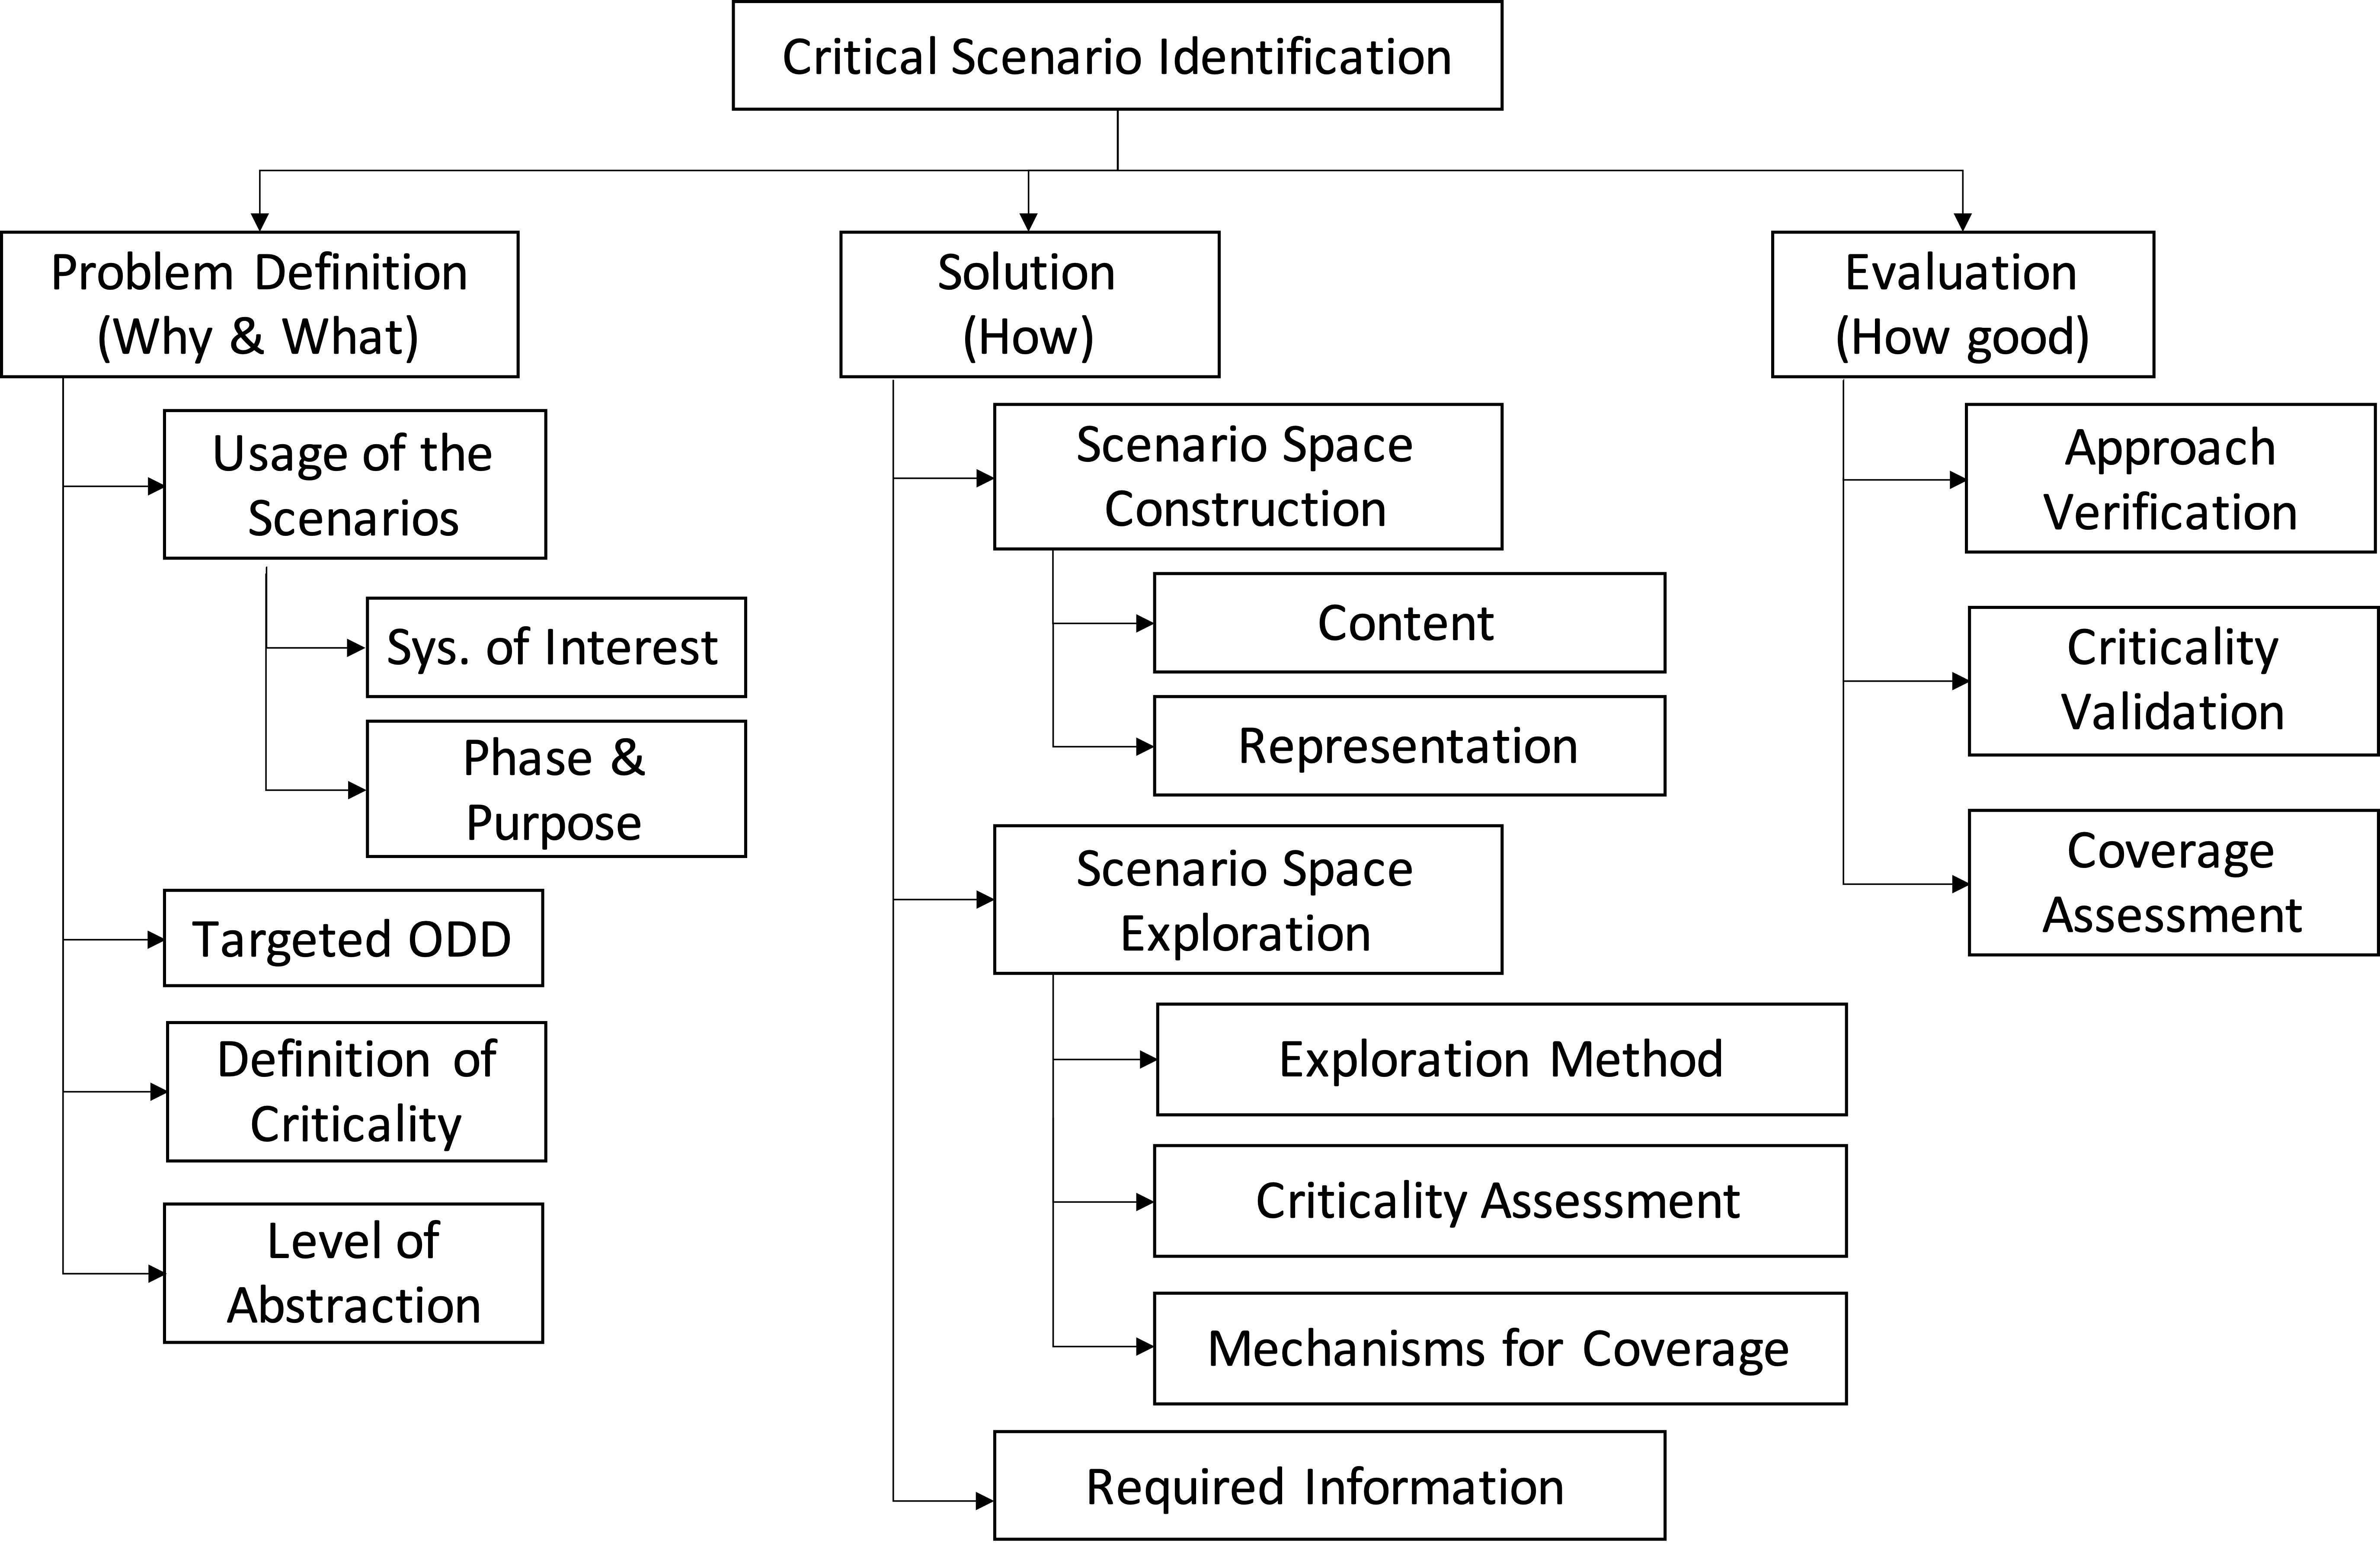 Finding critical scenarios for automated driving systems-A systematic mapping study